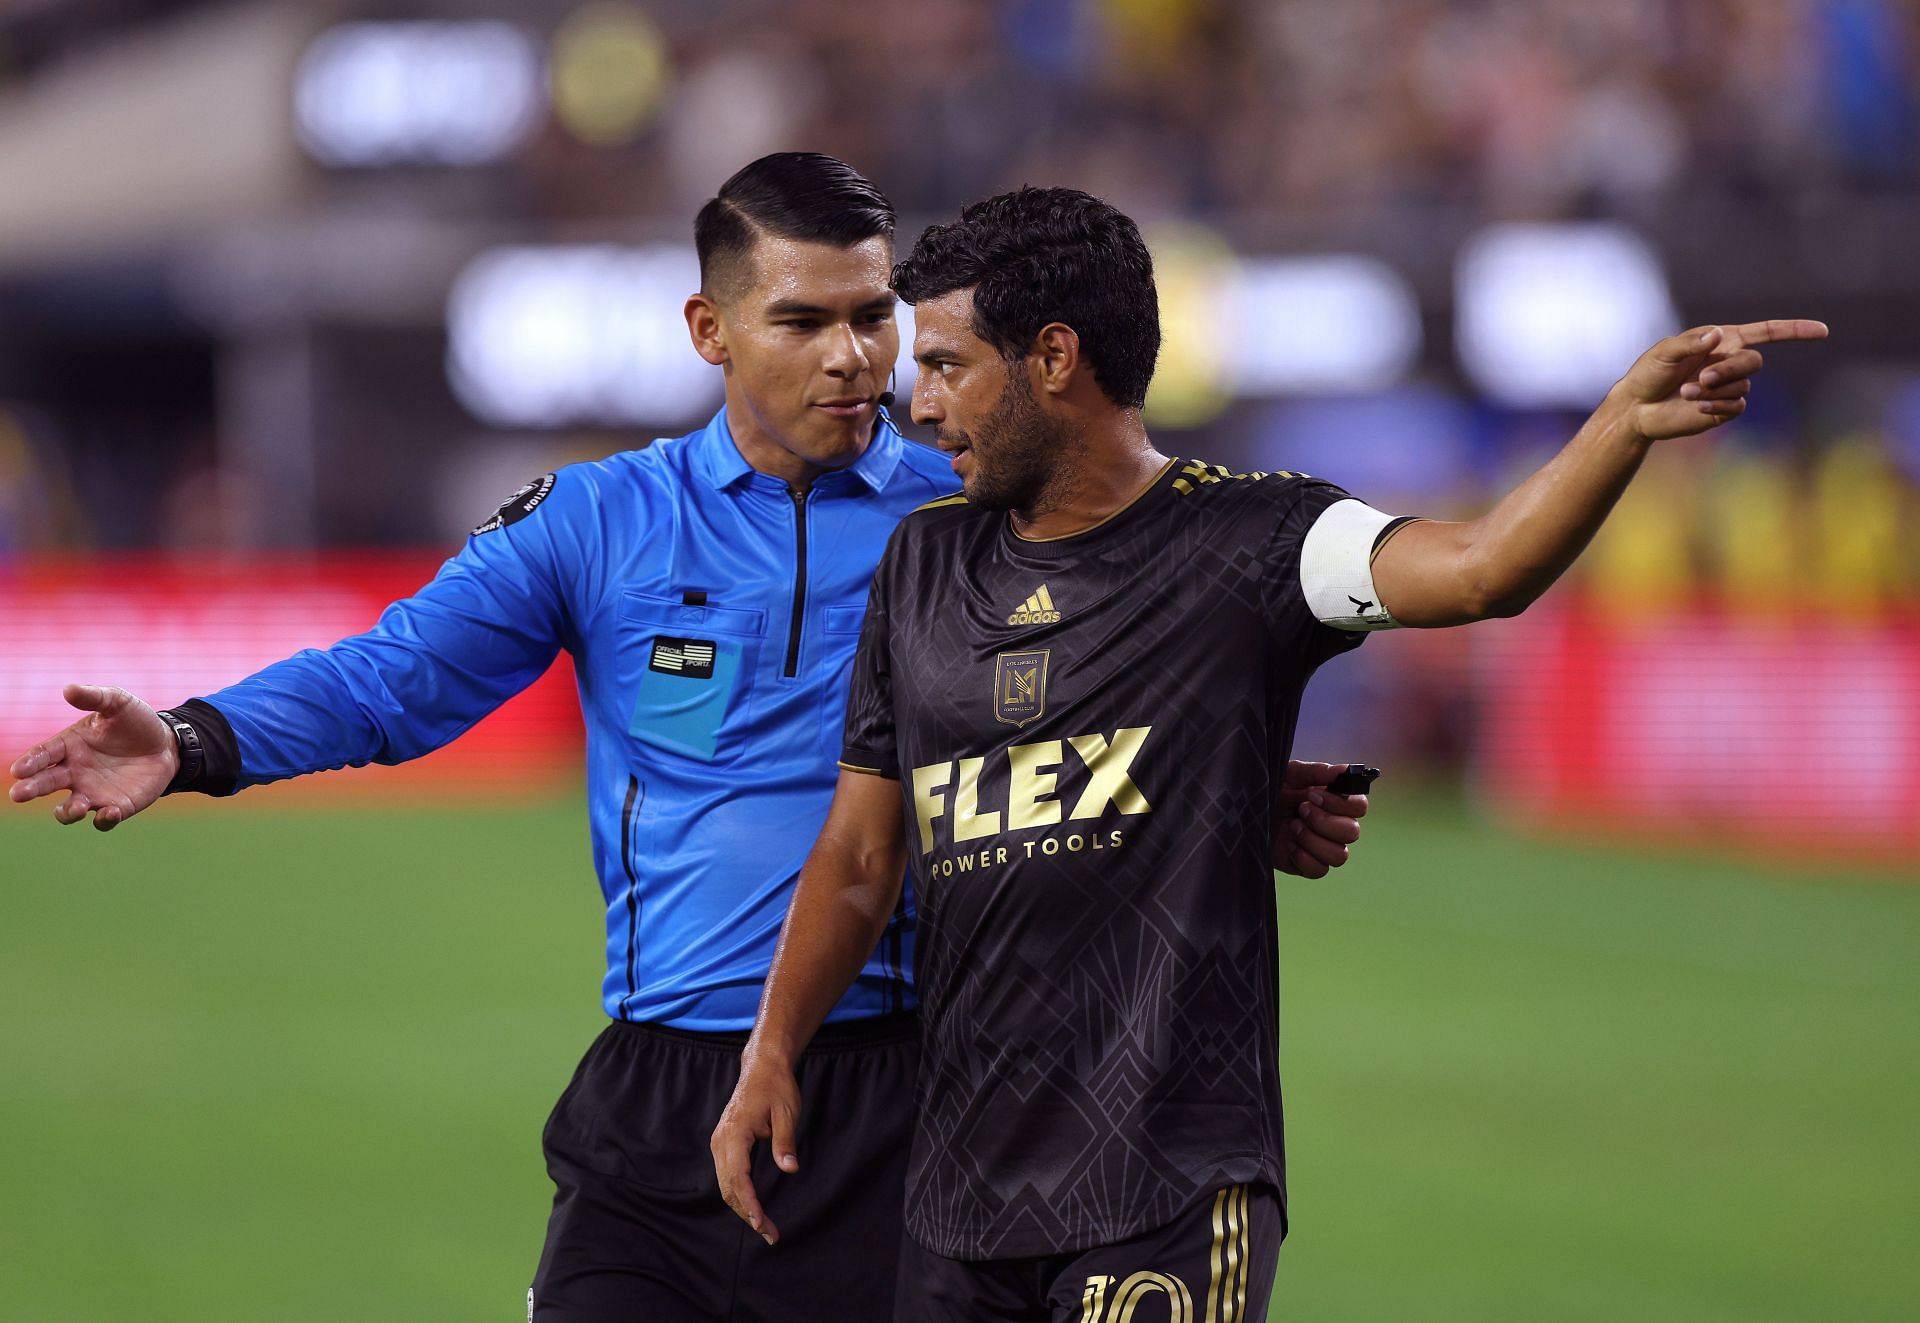 LAFC could seal their playoffs berth against San Jose on Saturday.